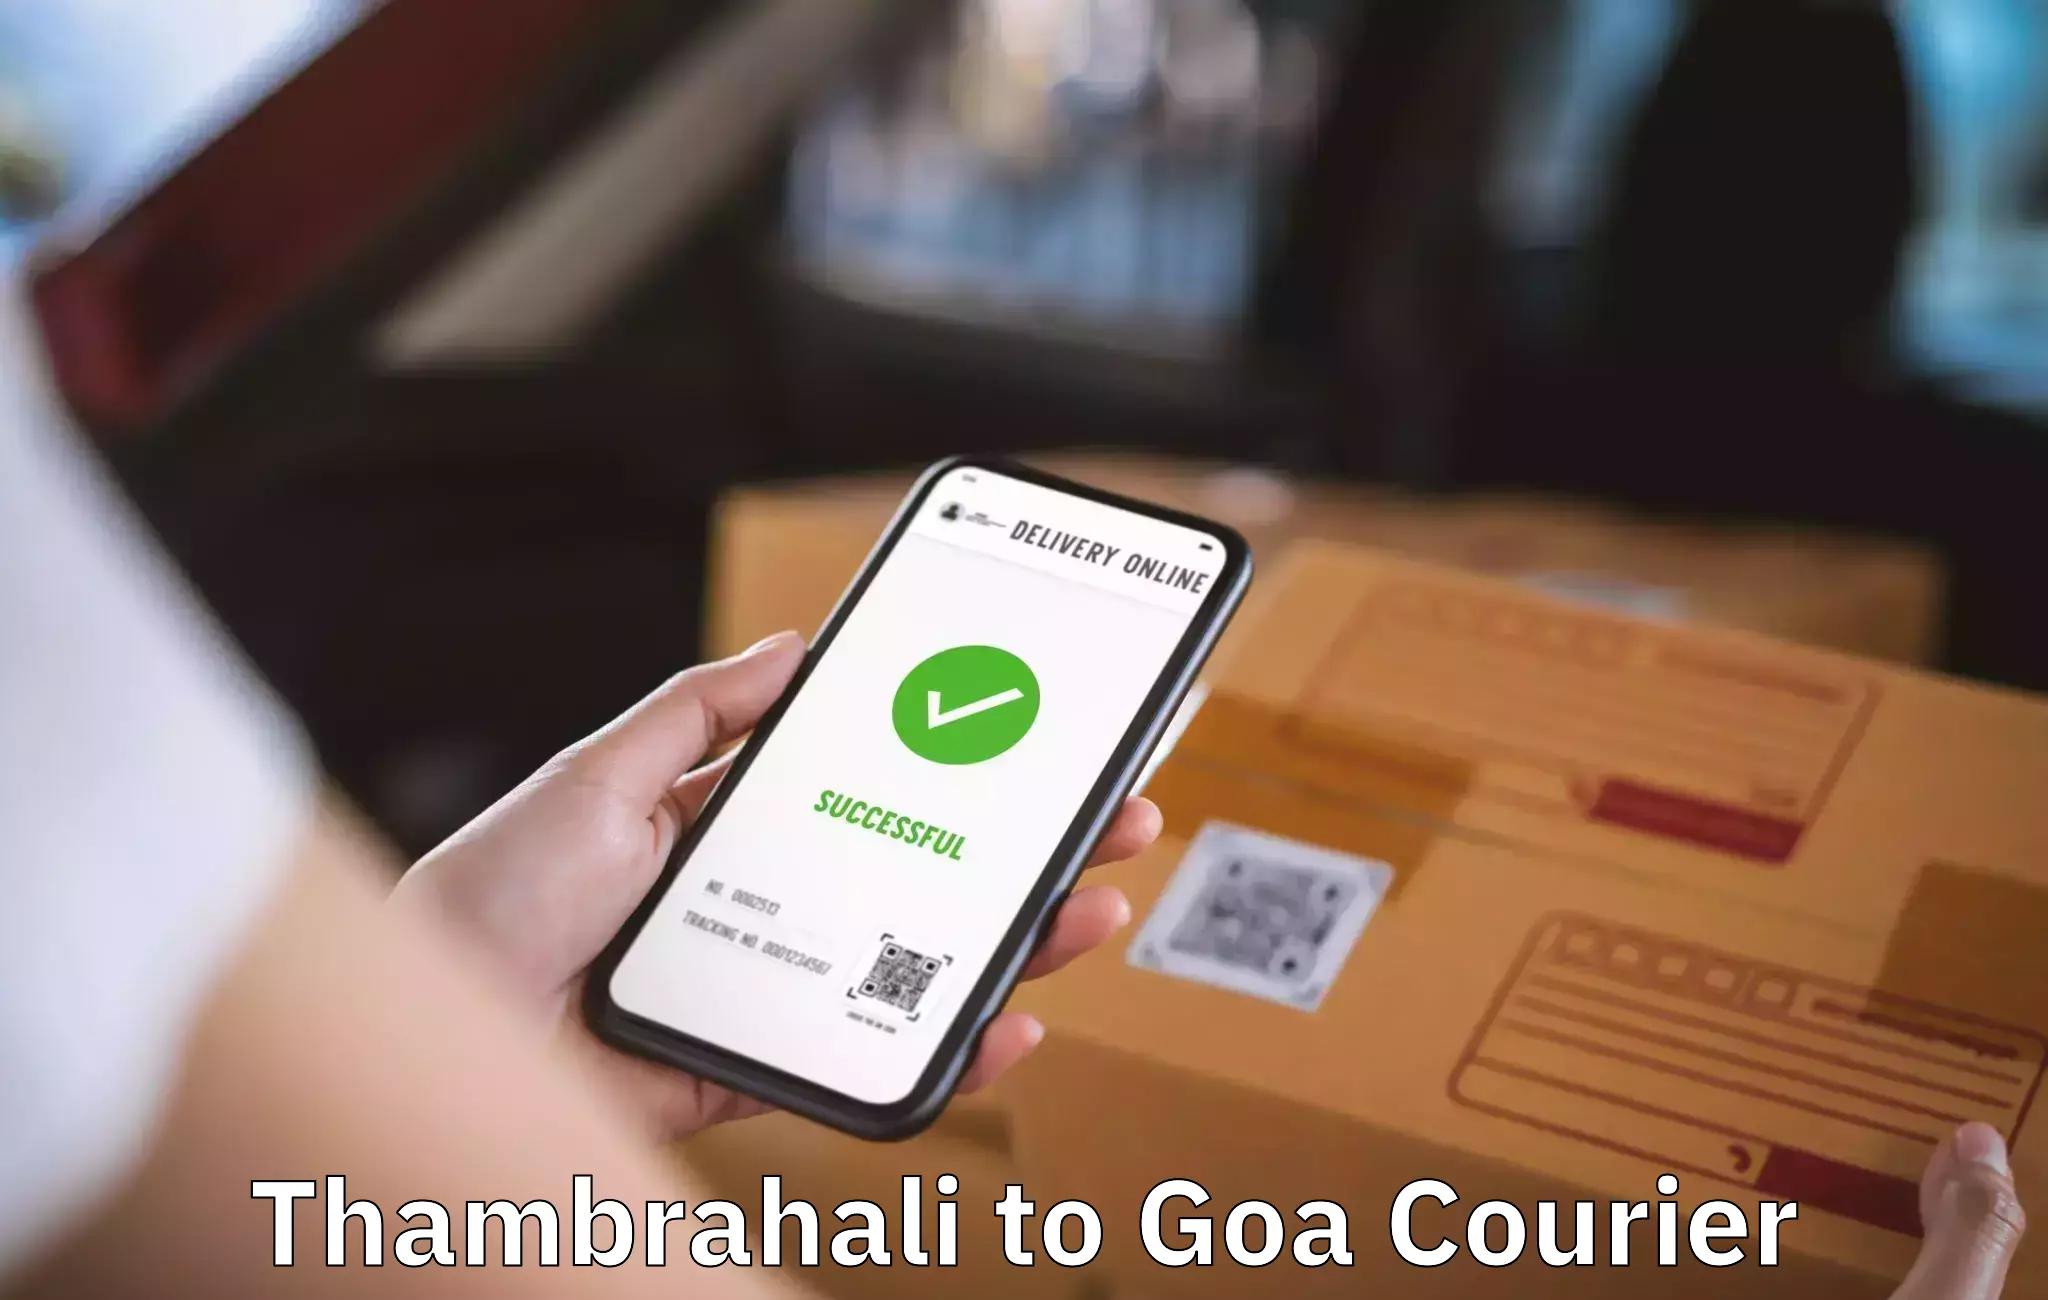 Furniture transport specialists Thambrahali to Goa